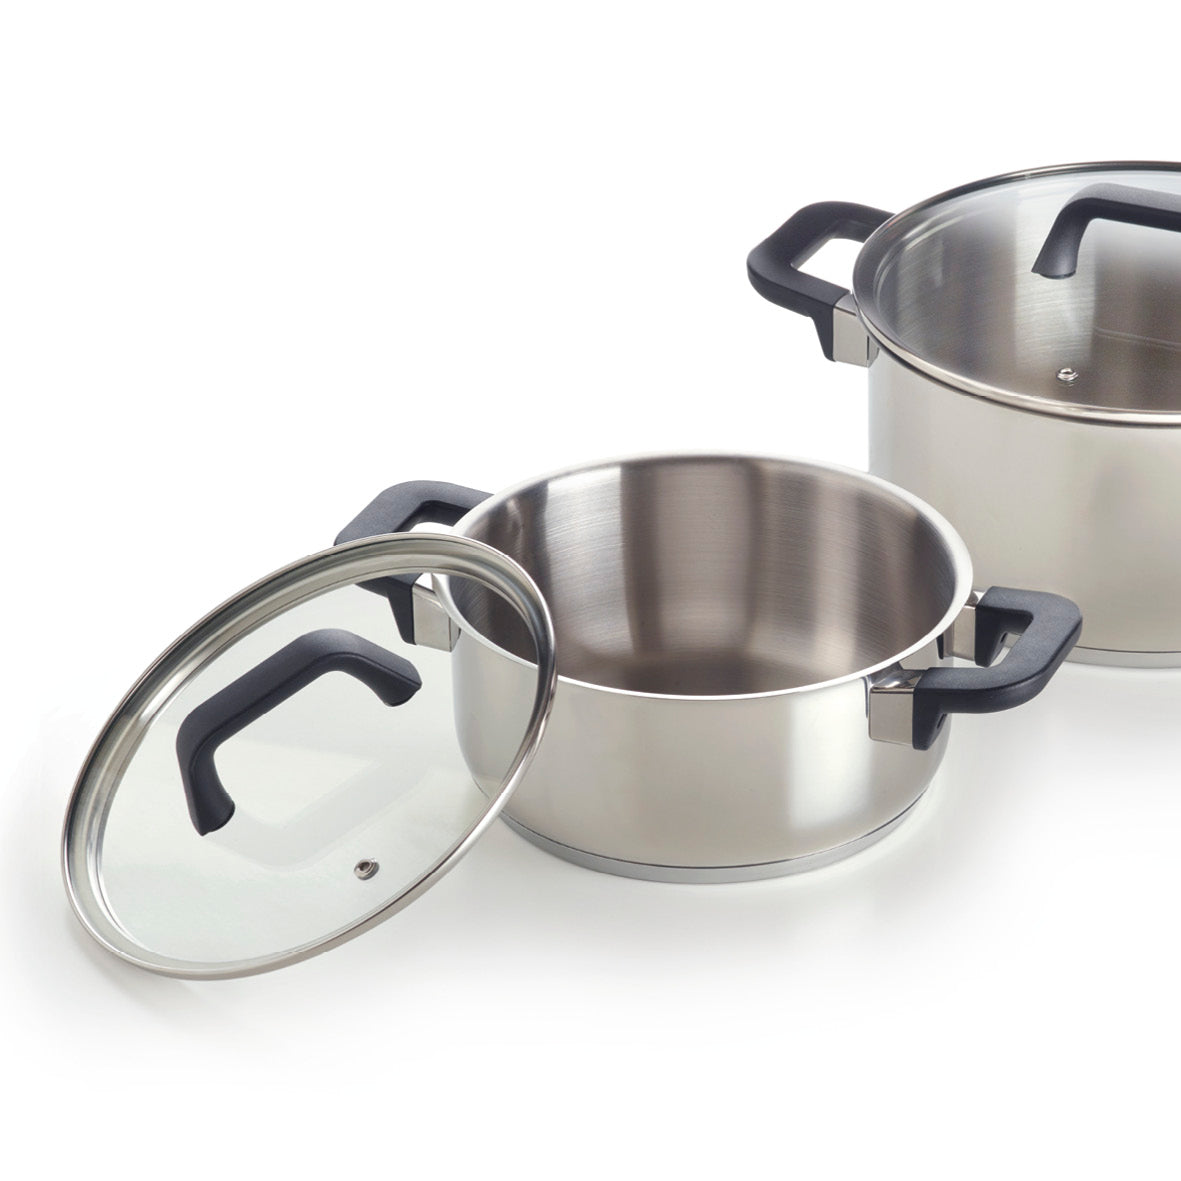 Set of 2 casseroles with glass lids - Stainless steel - Silver